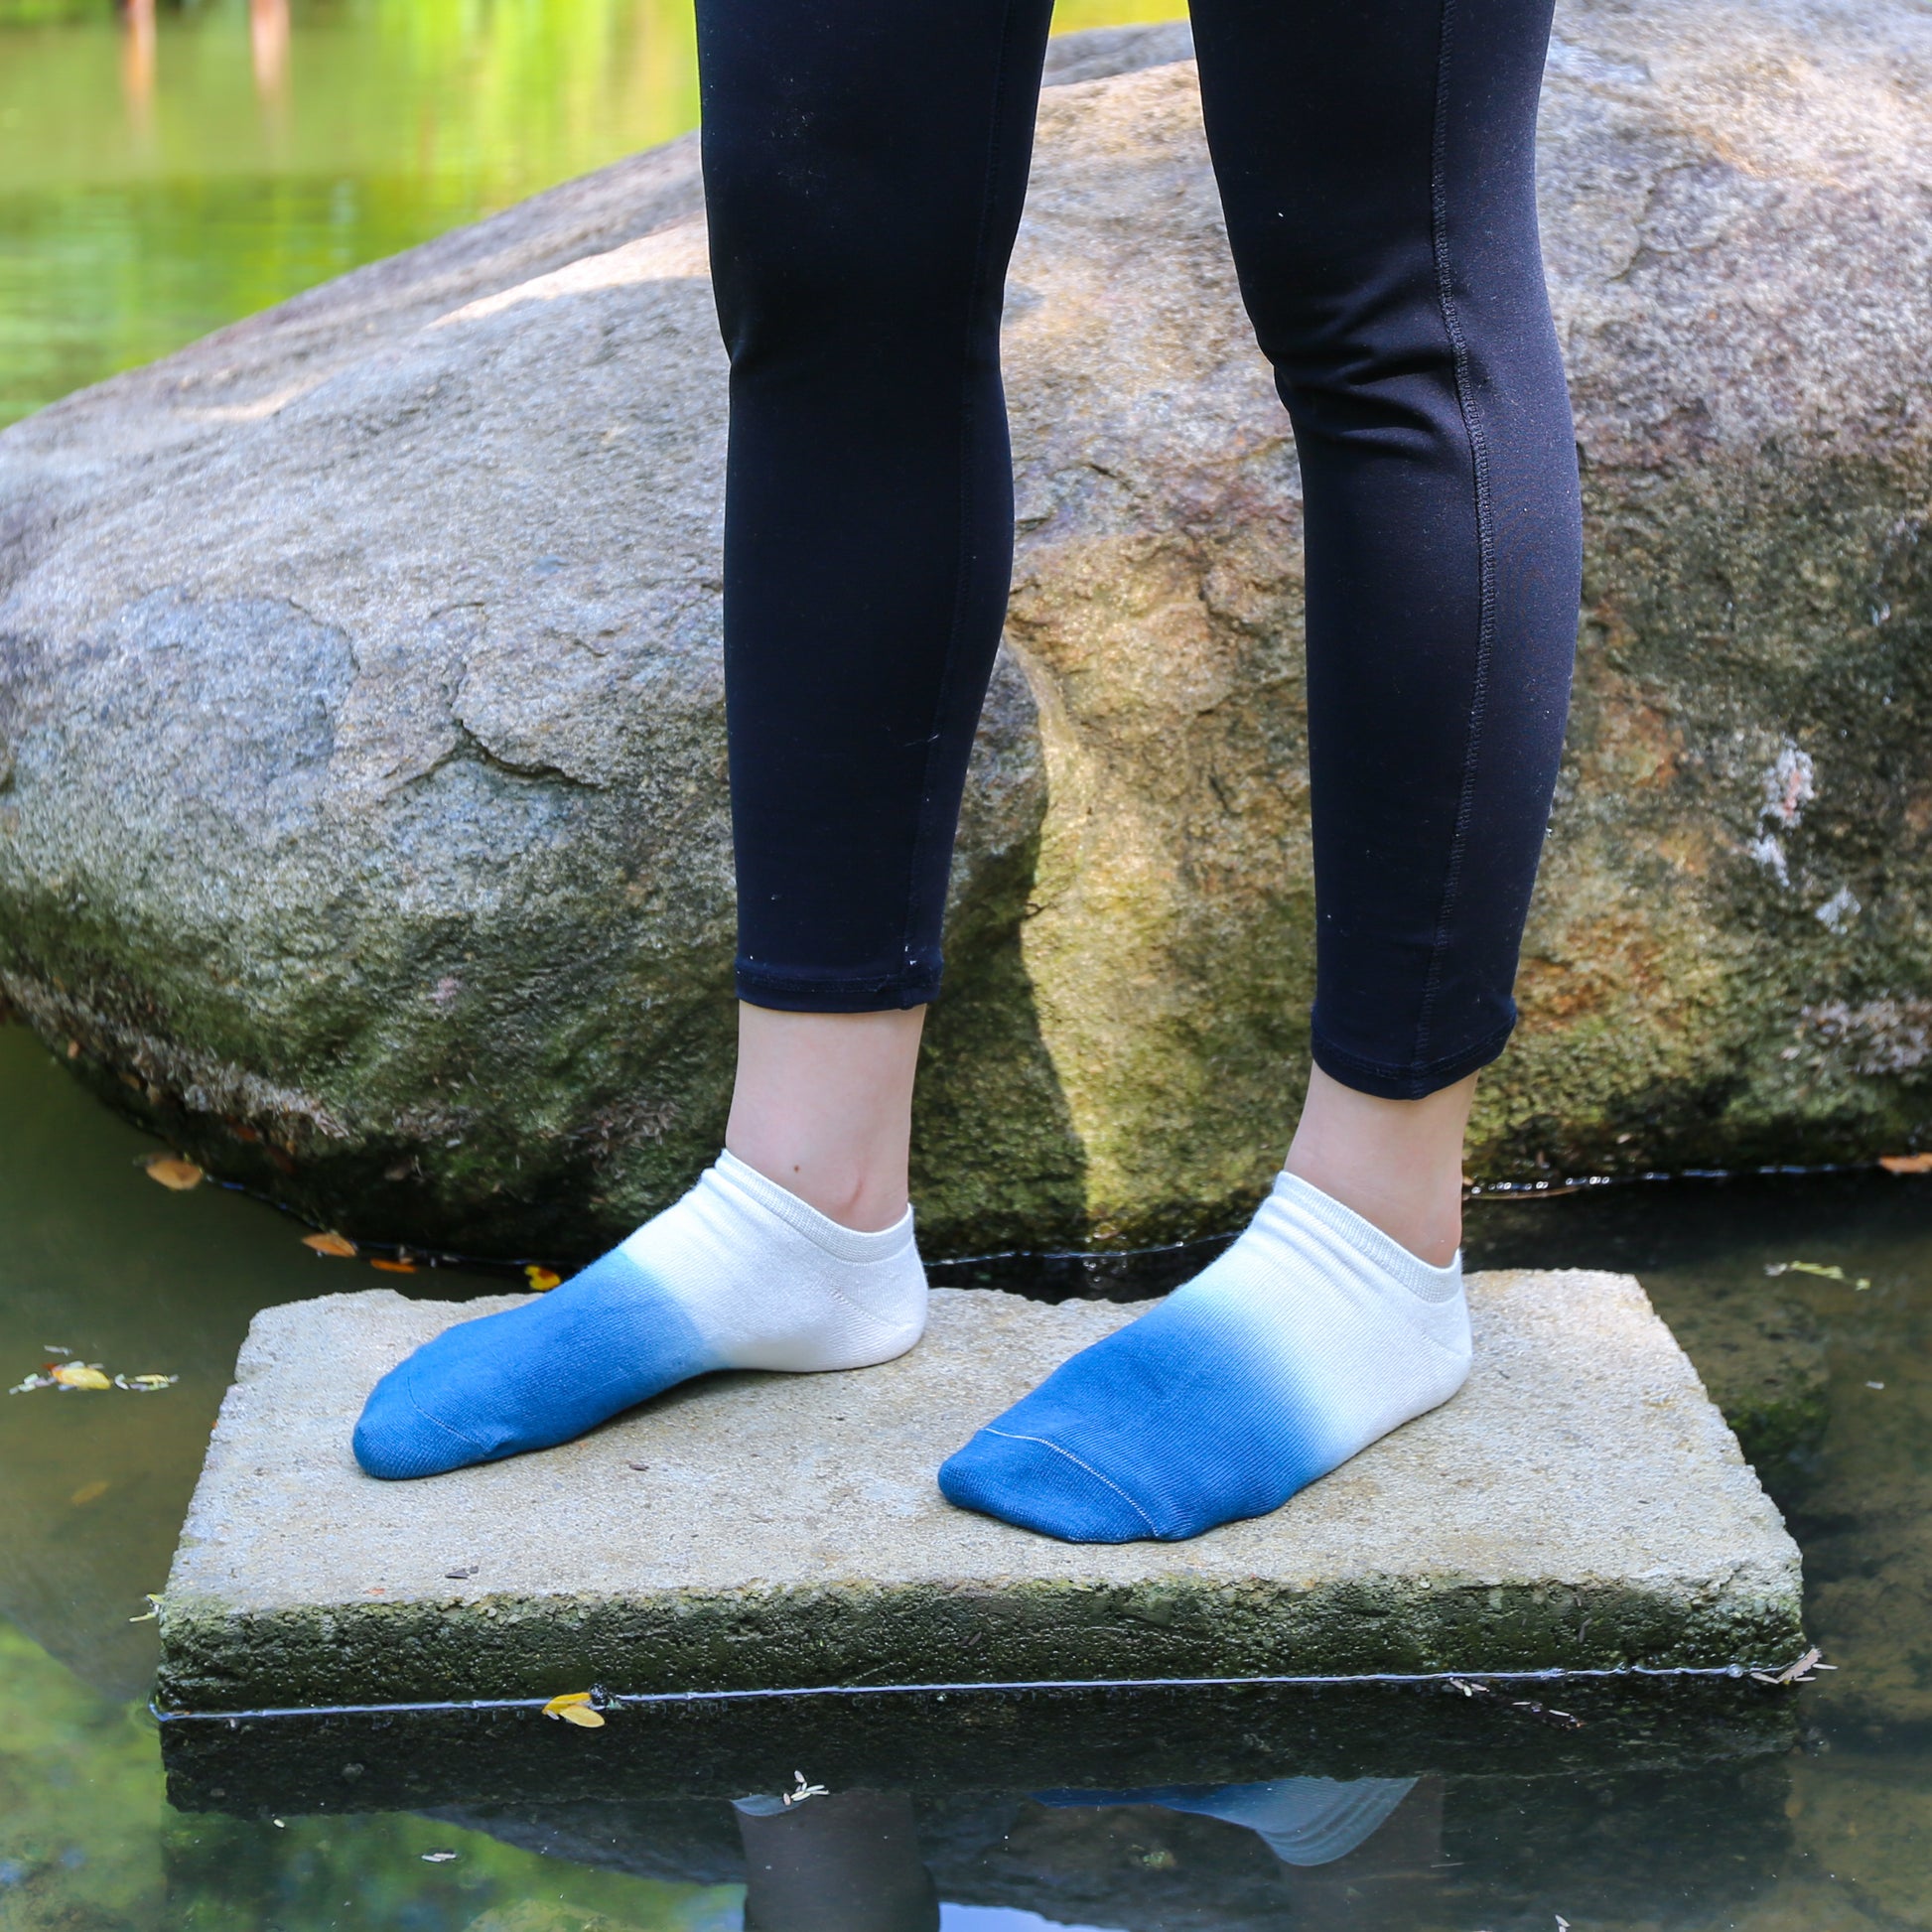 Mercy Bamboo Organic Cotton Blend Dip Dye Trainer Socks – Our Sock Stories